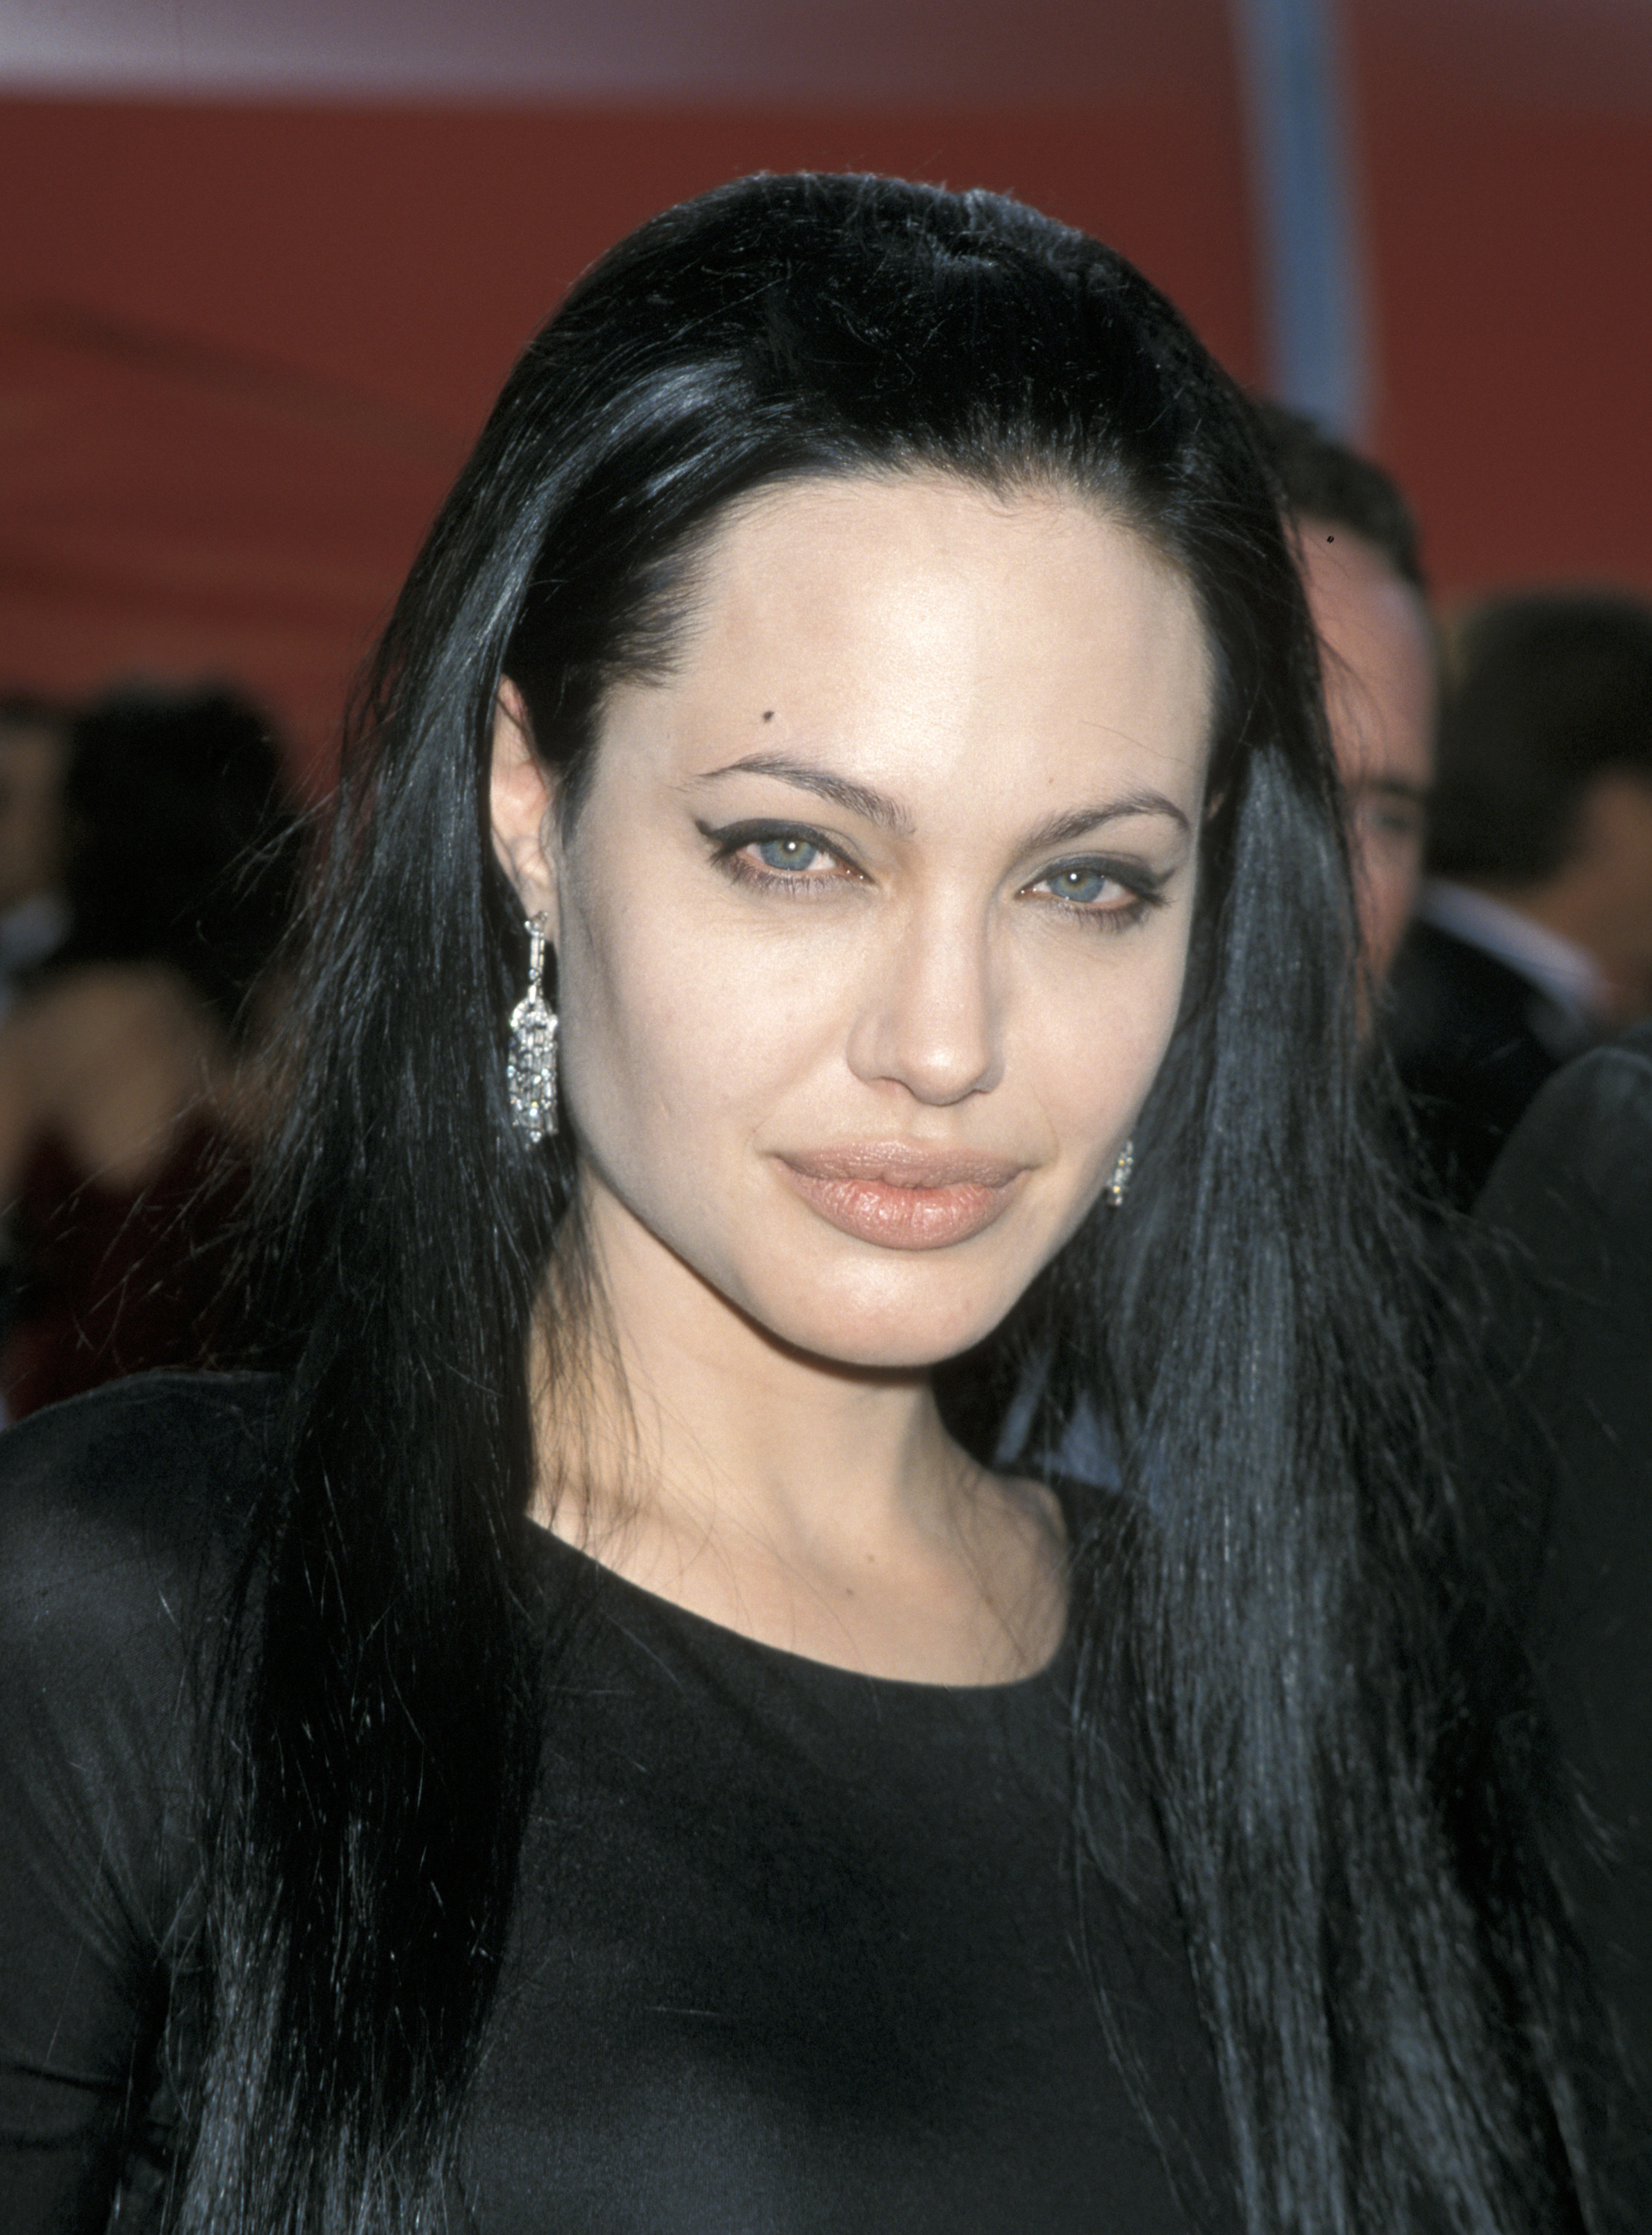 Jolie at the Oscars in 2000